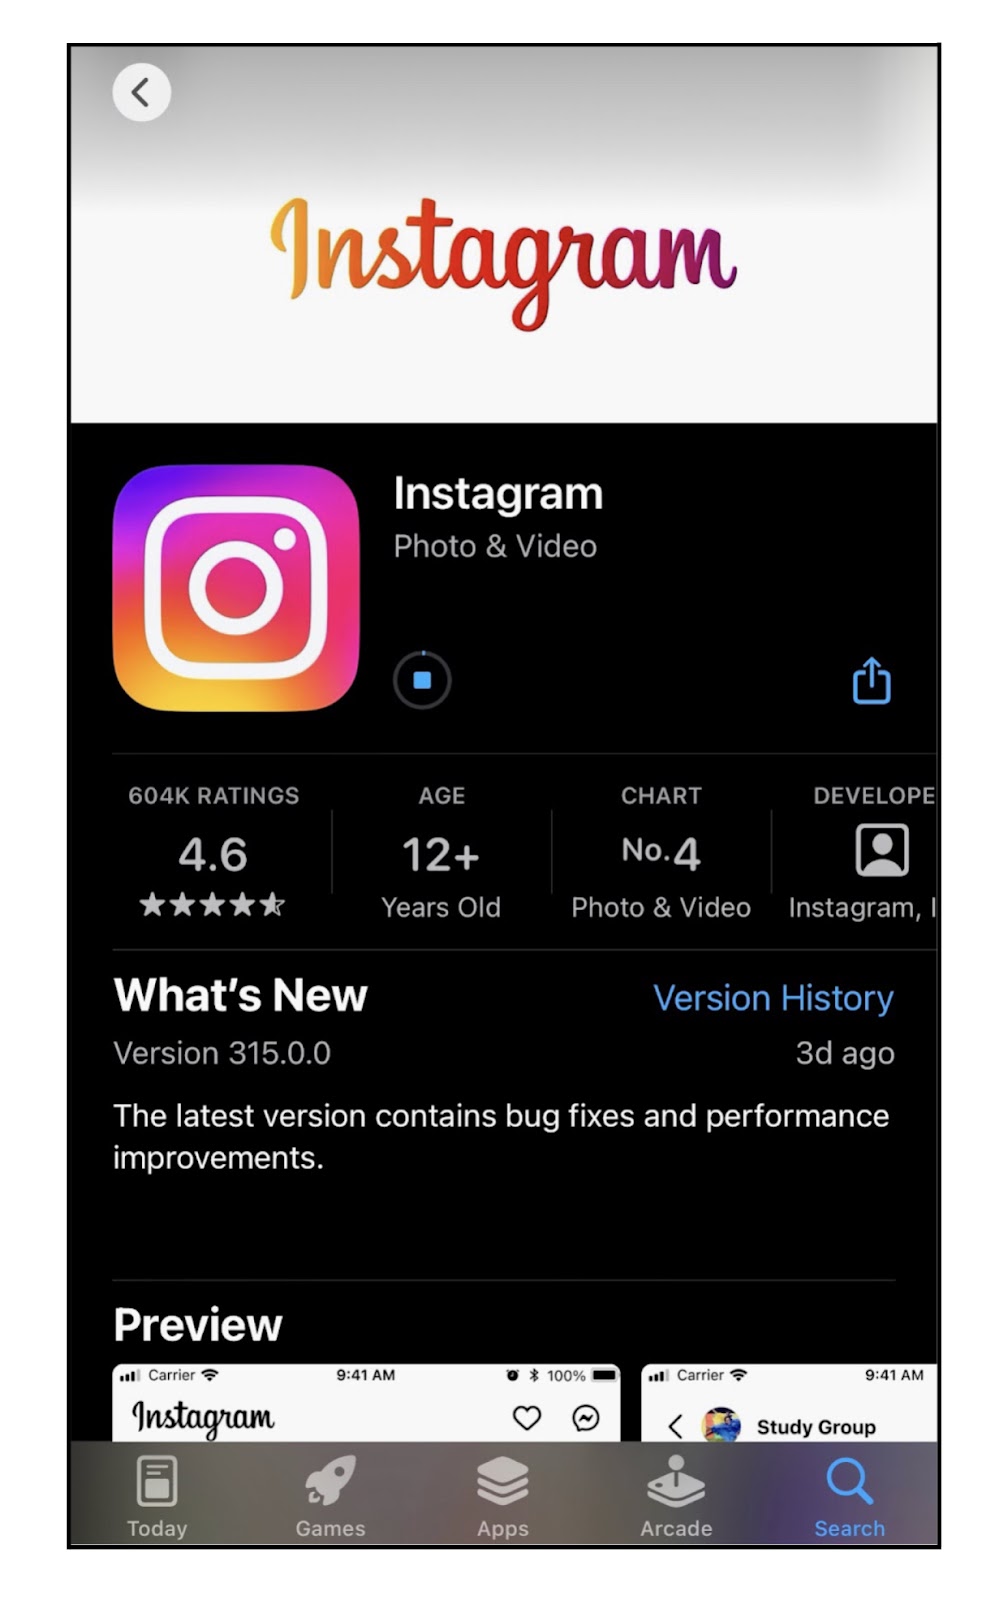 Download and Install the Instagram App